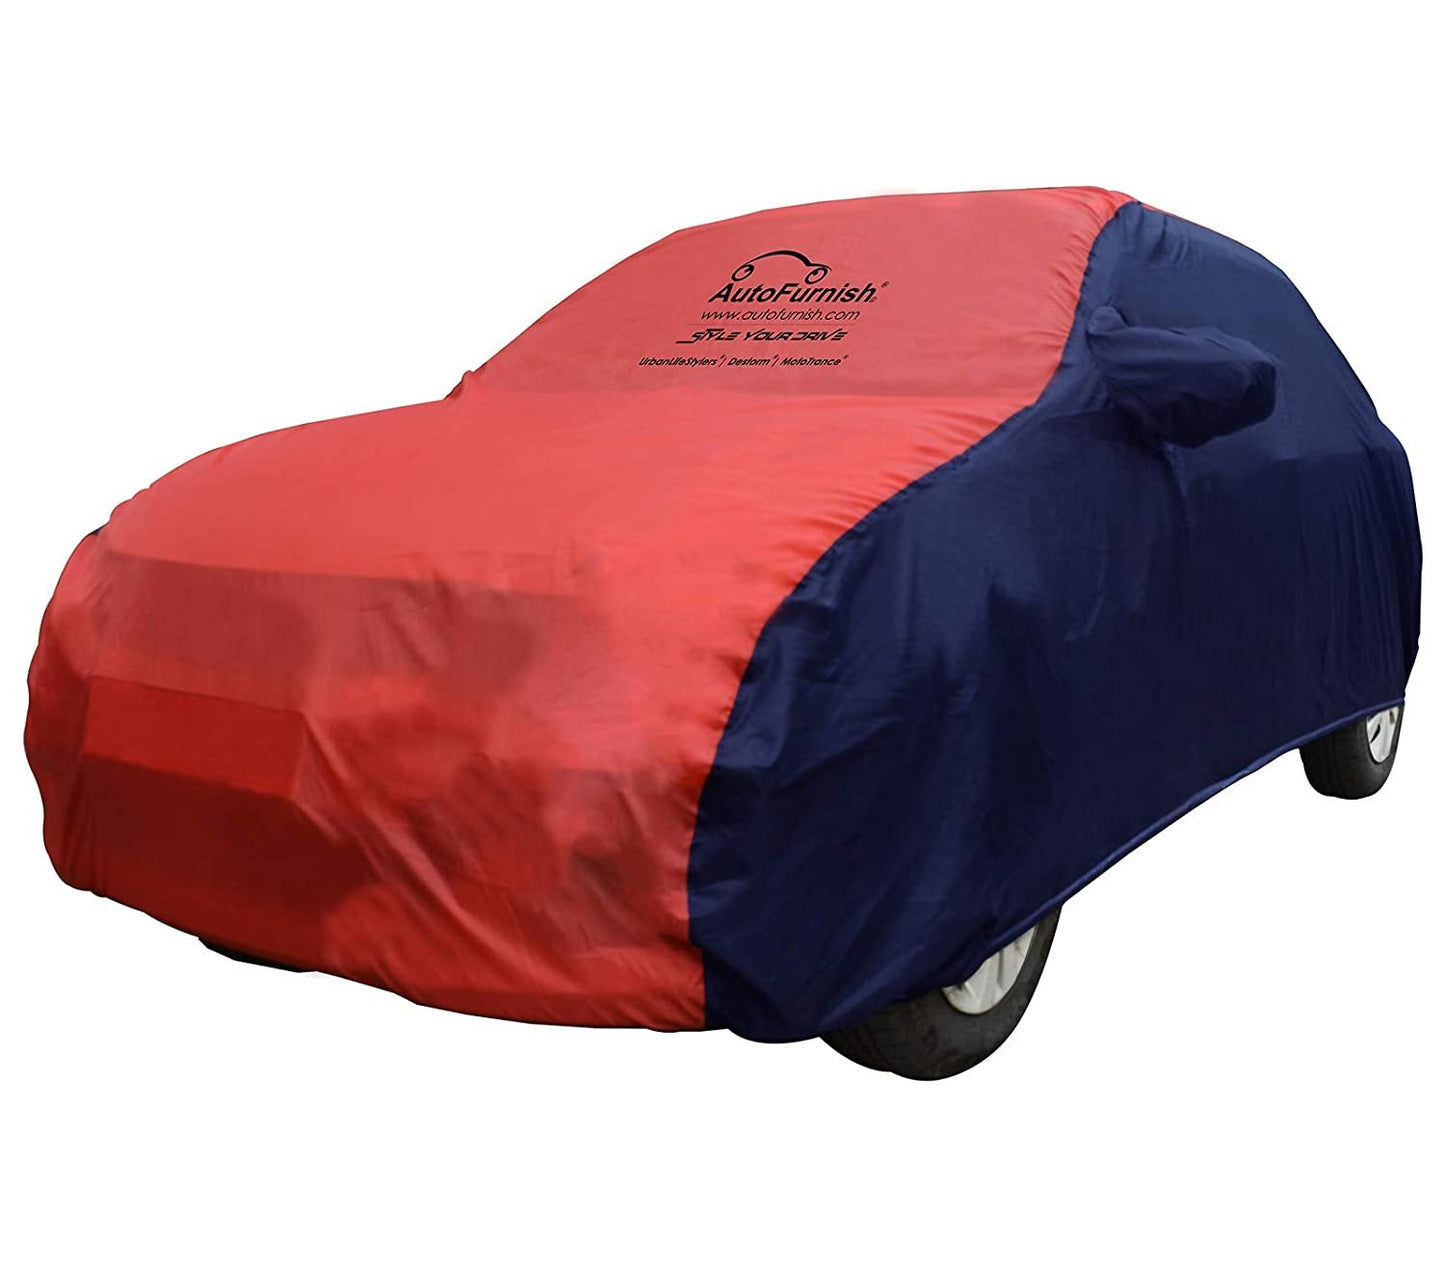 Mahindra XUV700 (2021) Car Body Cover, Triple Stitched, Heat & Water Resistant with Side Mirror Pockets (SPORTY Series)